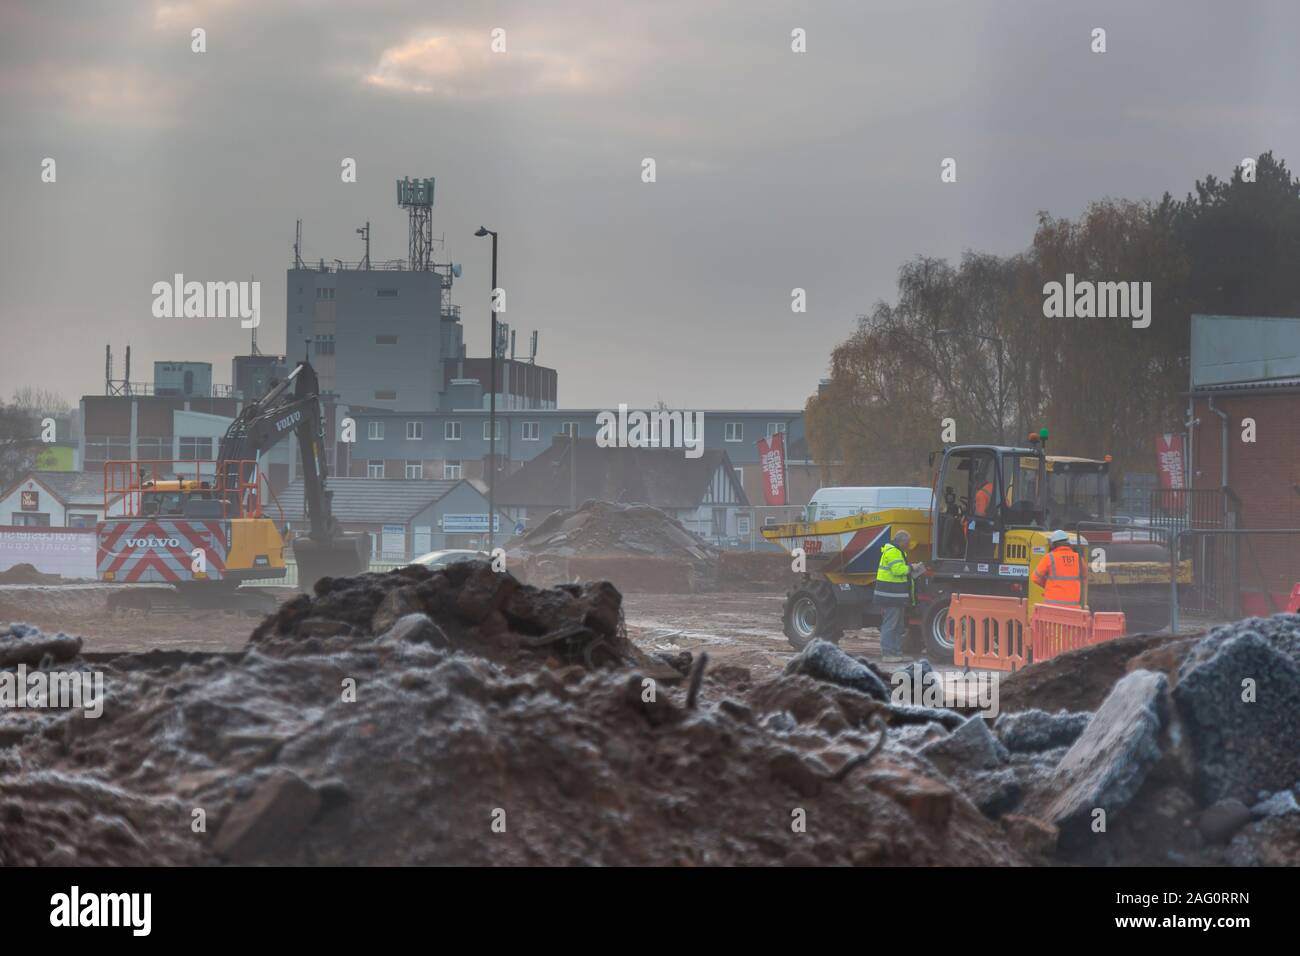 UK building site on a cold, misty, frosty, winter morning in December. British building site with people working. Stock Photo